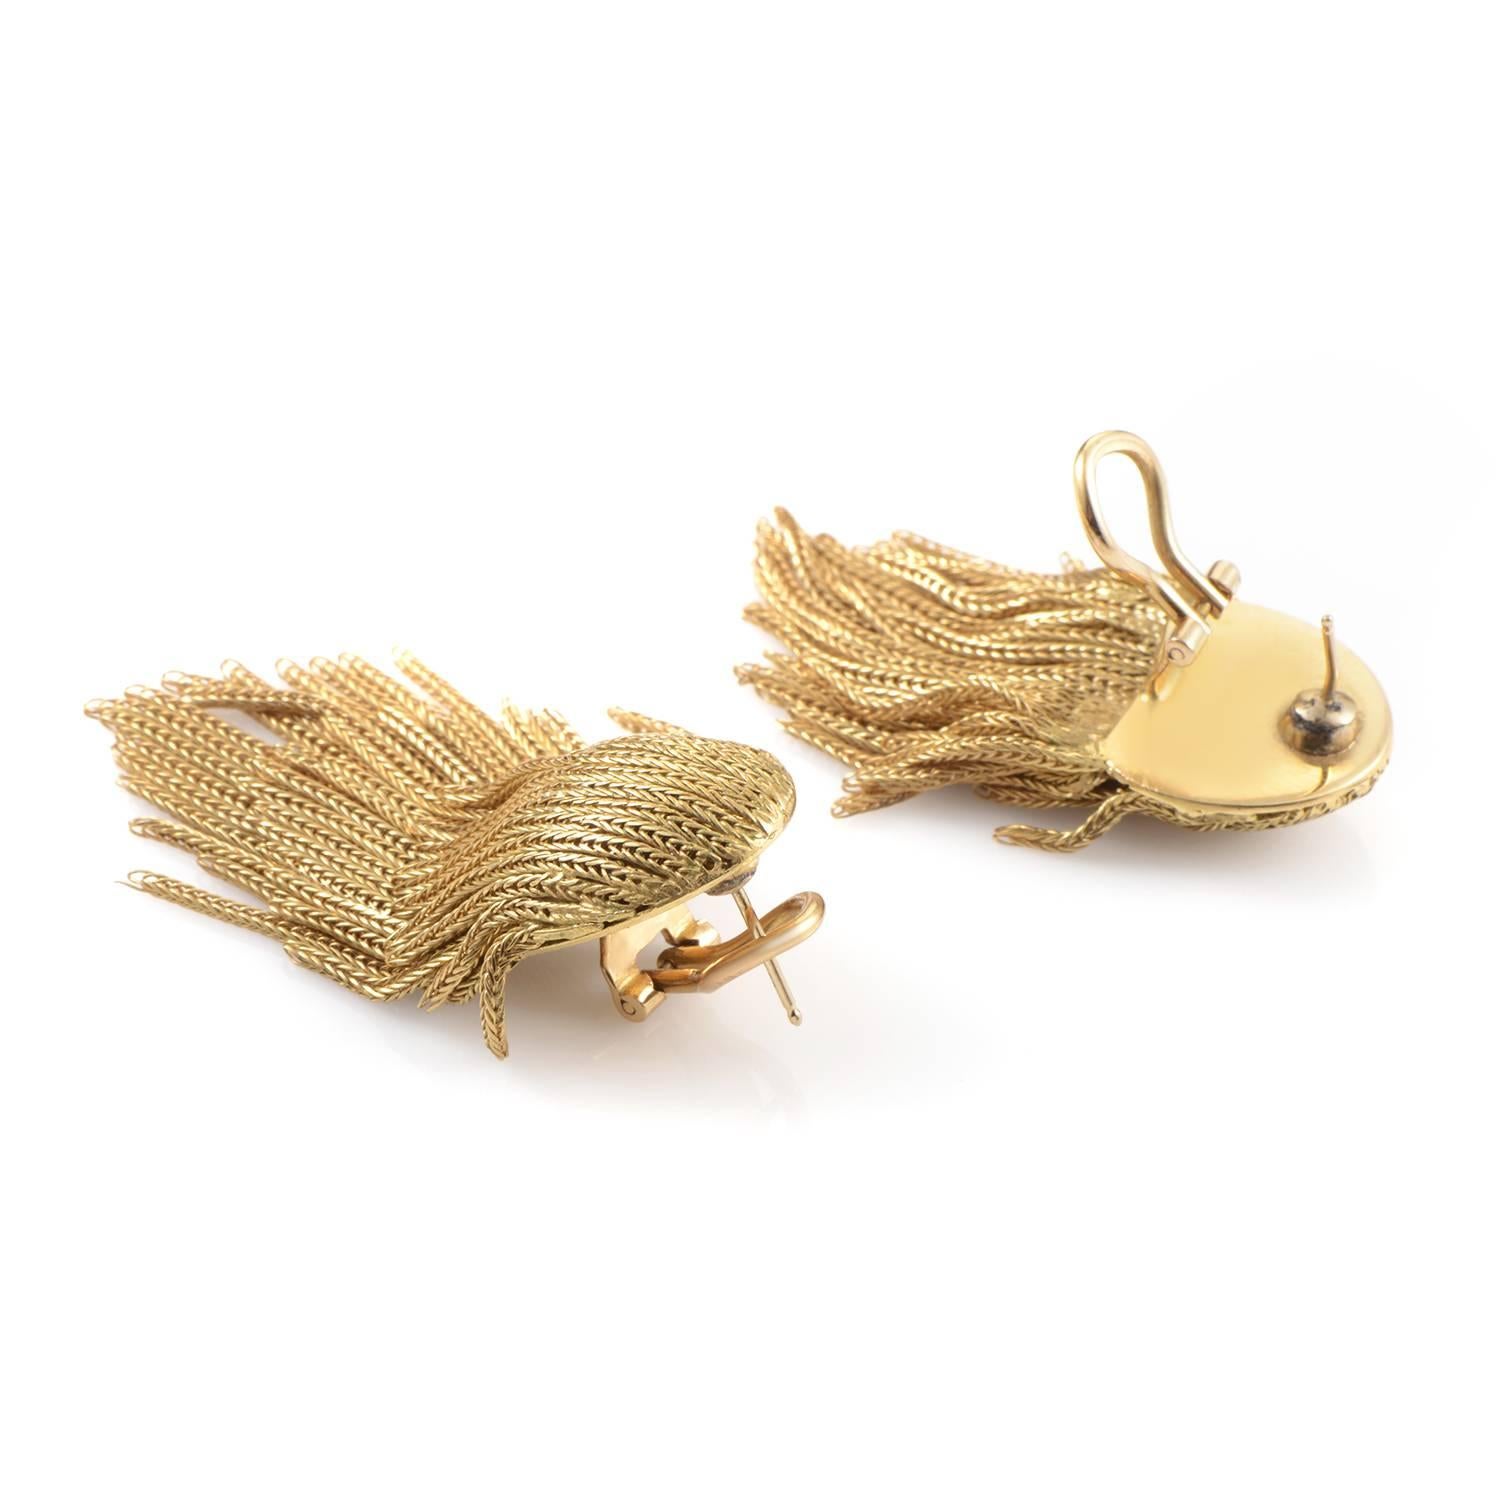 Dazzling and alluring at the very first sight, these extraordinary earrings from Tiffany & Co. reveal the full beauty of their intricate design and immense expertise in crafting it upon closer look at the amazing braided texture of 18K yellow